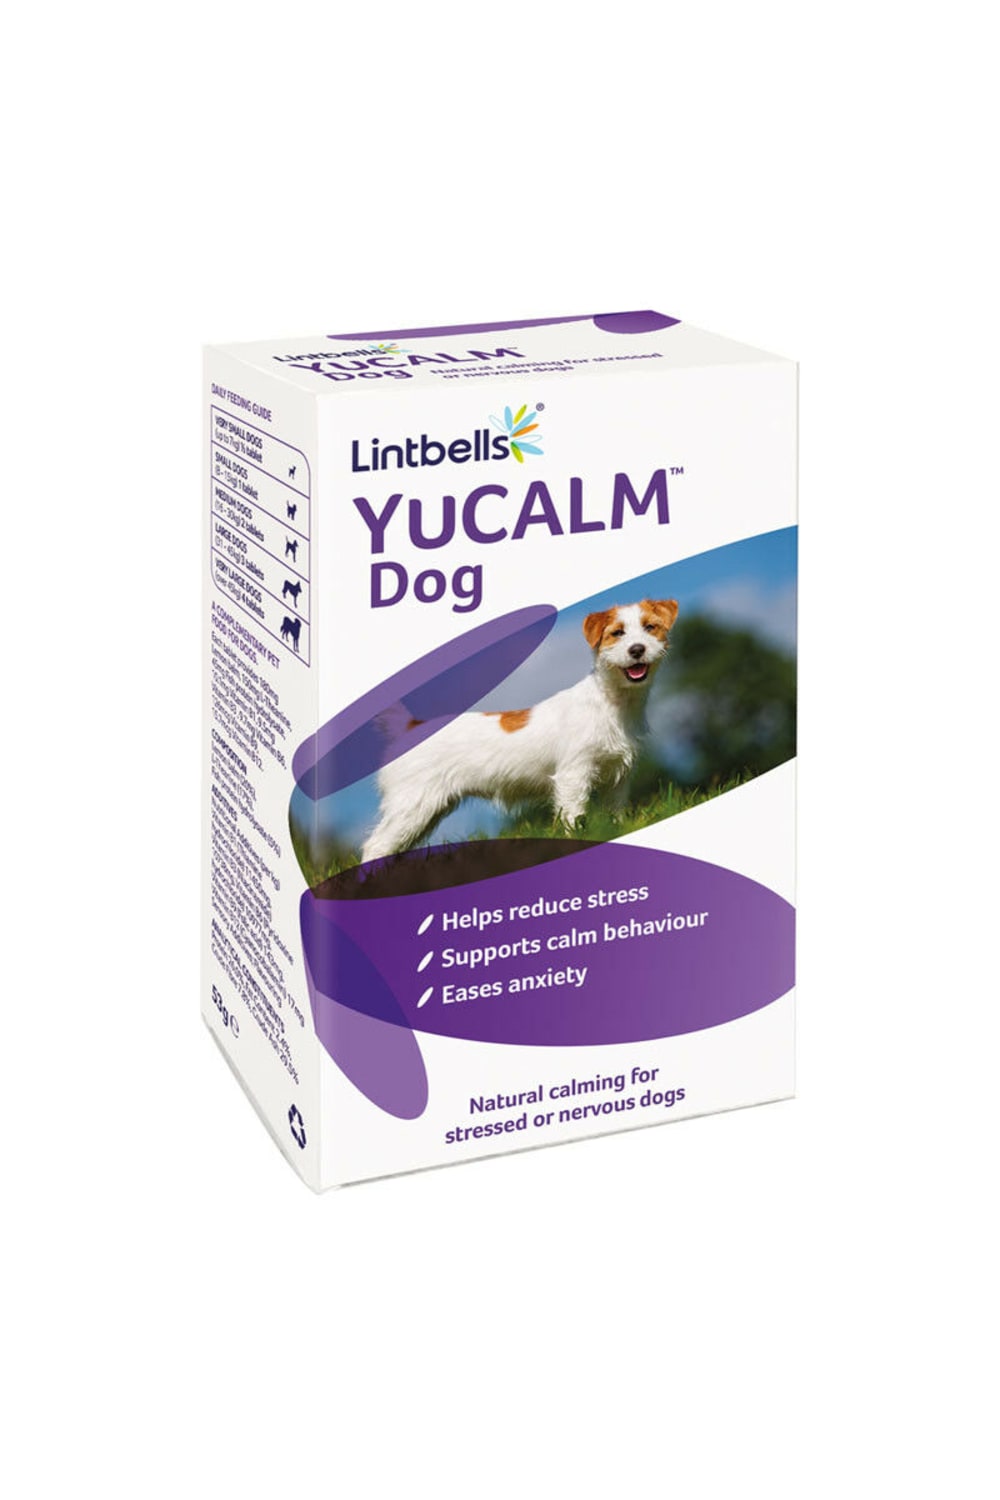 Lintbells YuCALM Tablets For Dogs (May Vary) (60 Tablets)